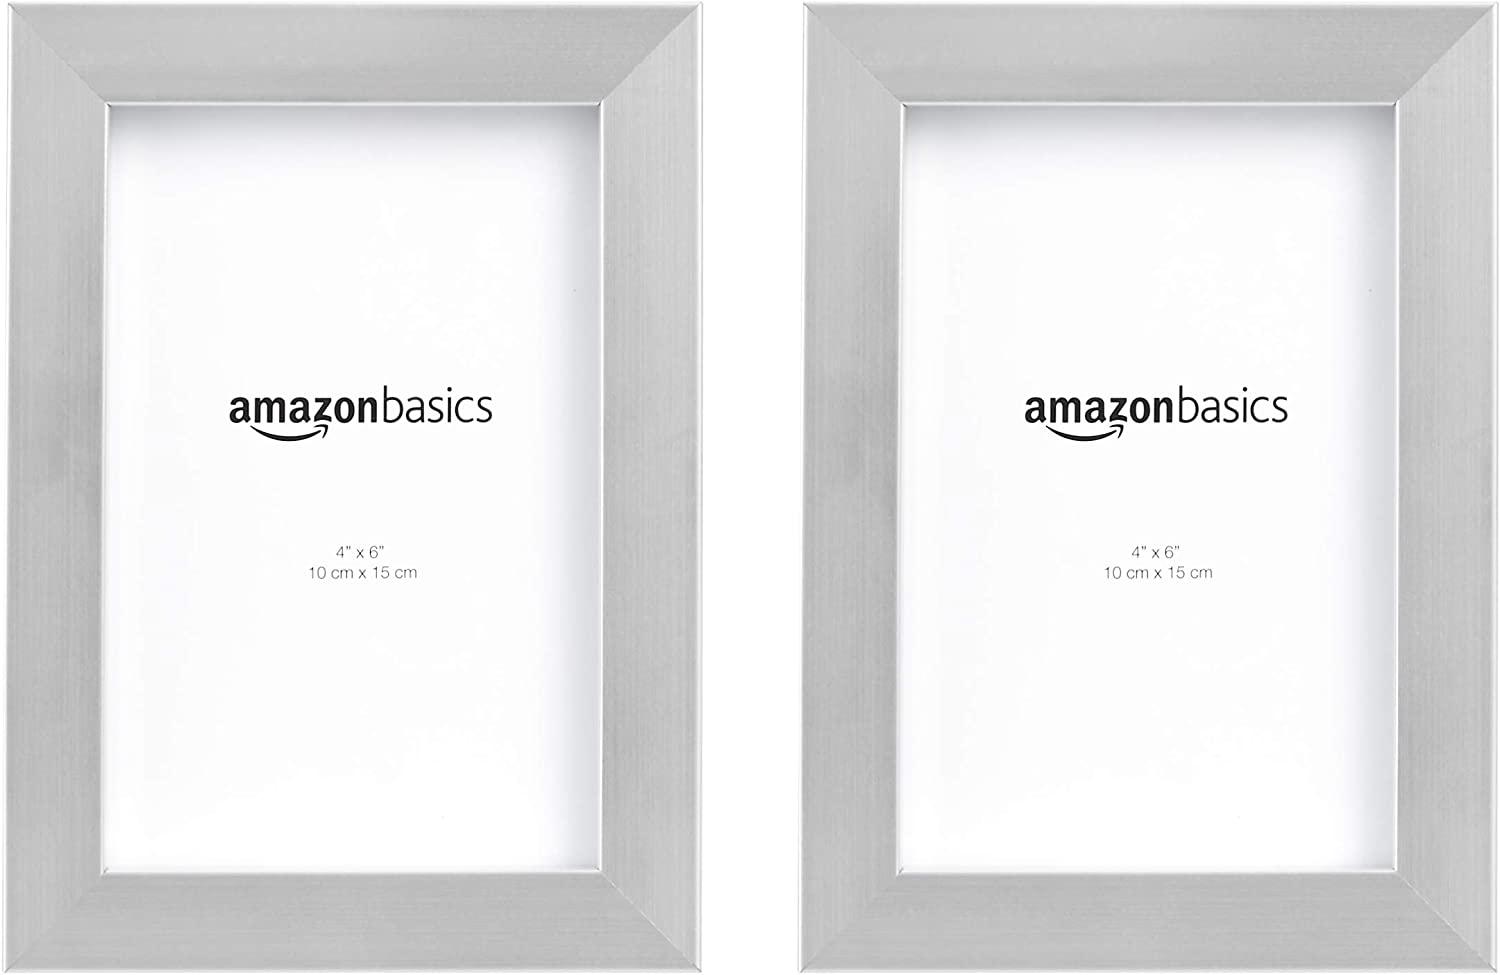 Amazon Basics 4x6 Photo Picture Frame 2 Pack for $6.87